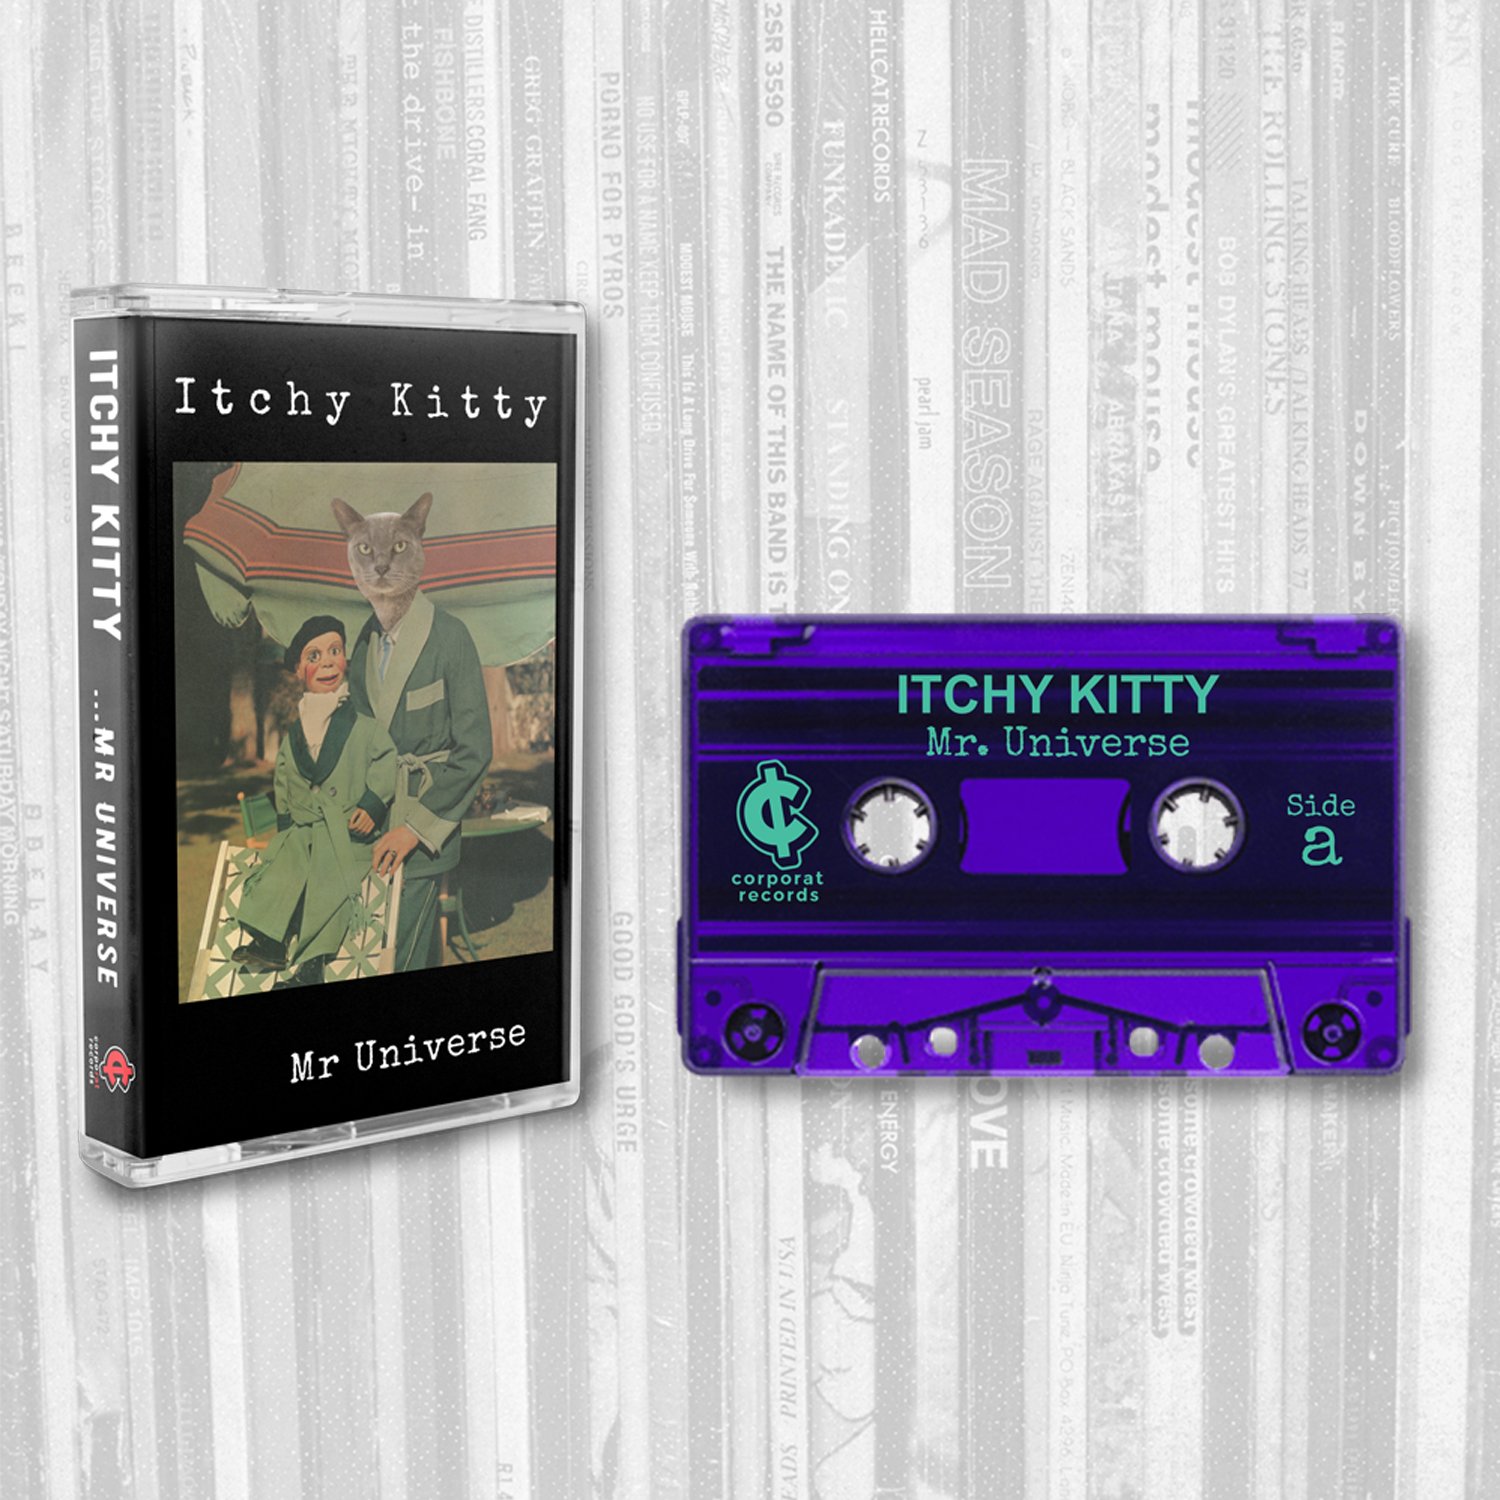 Itchy Kitty: Mr. Universe - Cassette Tape